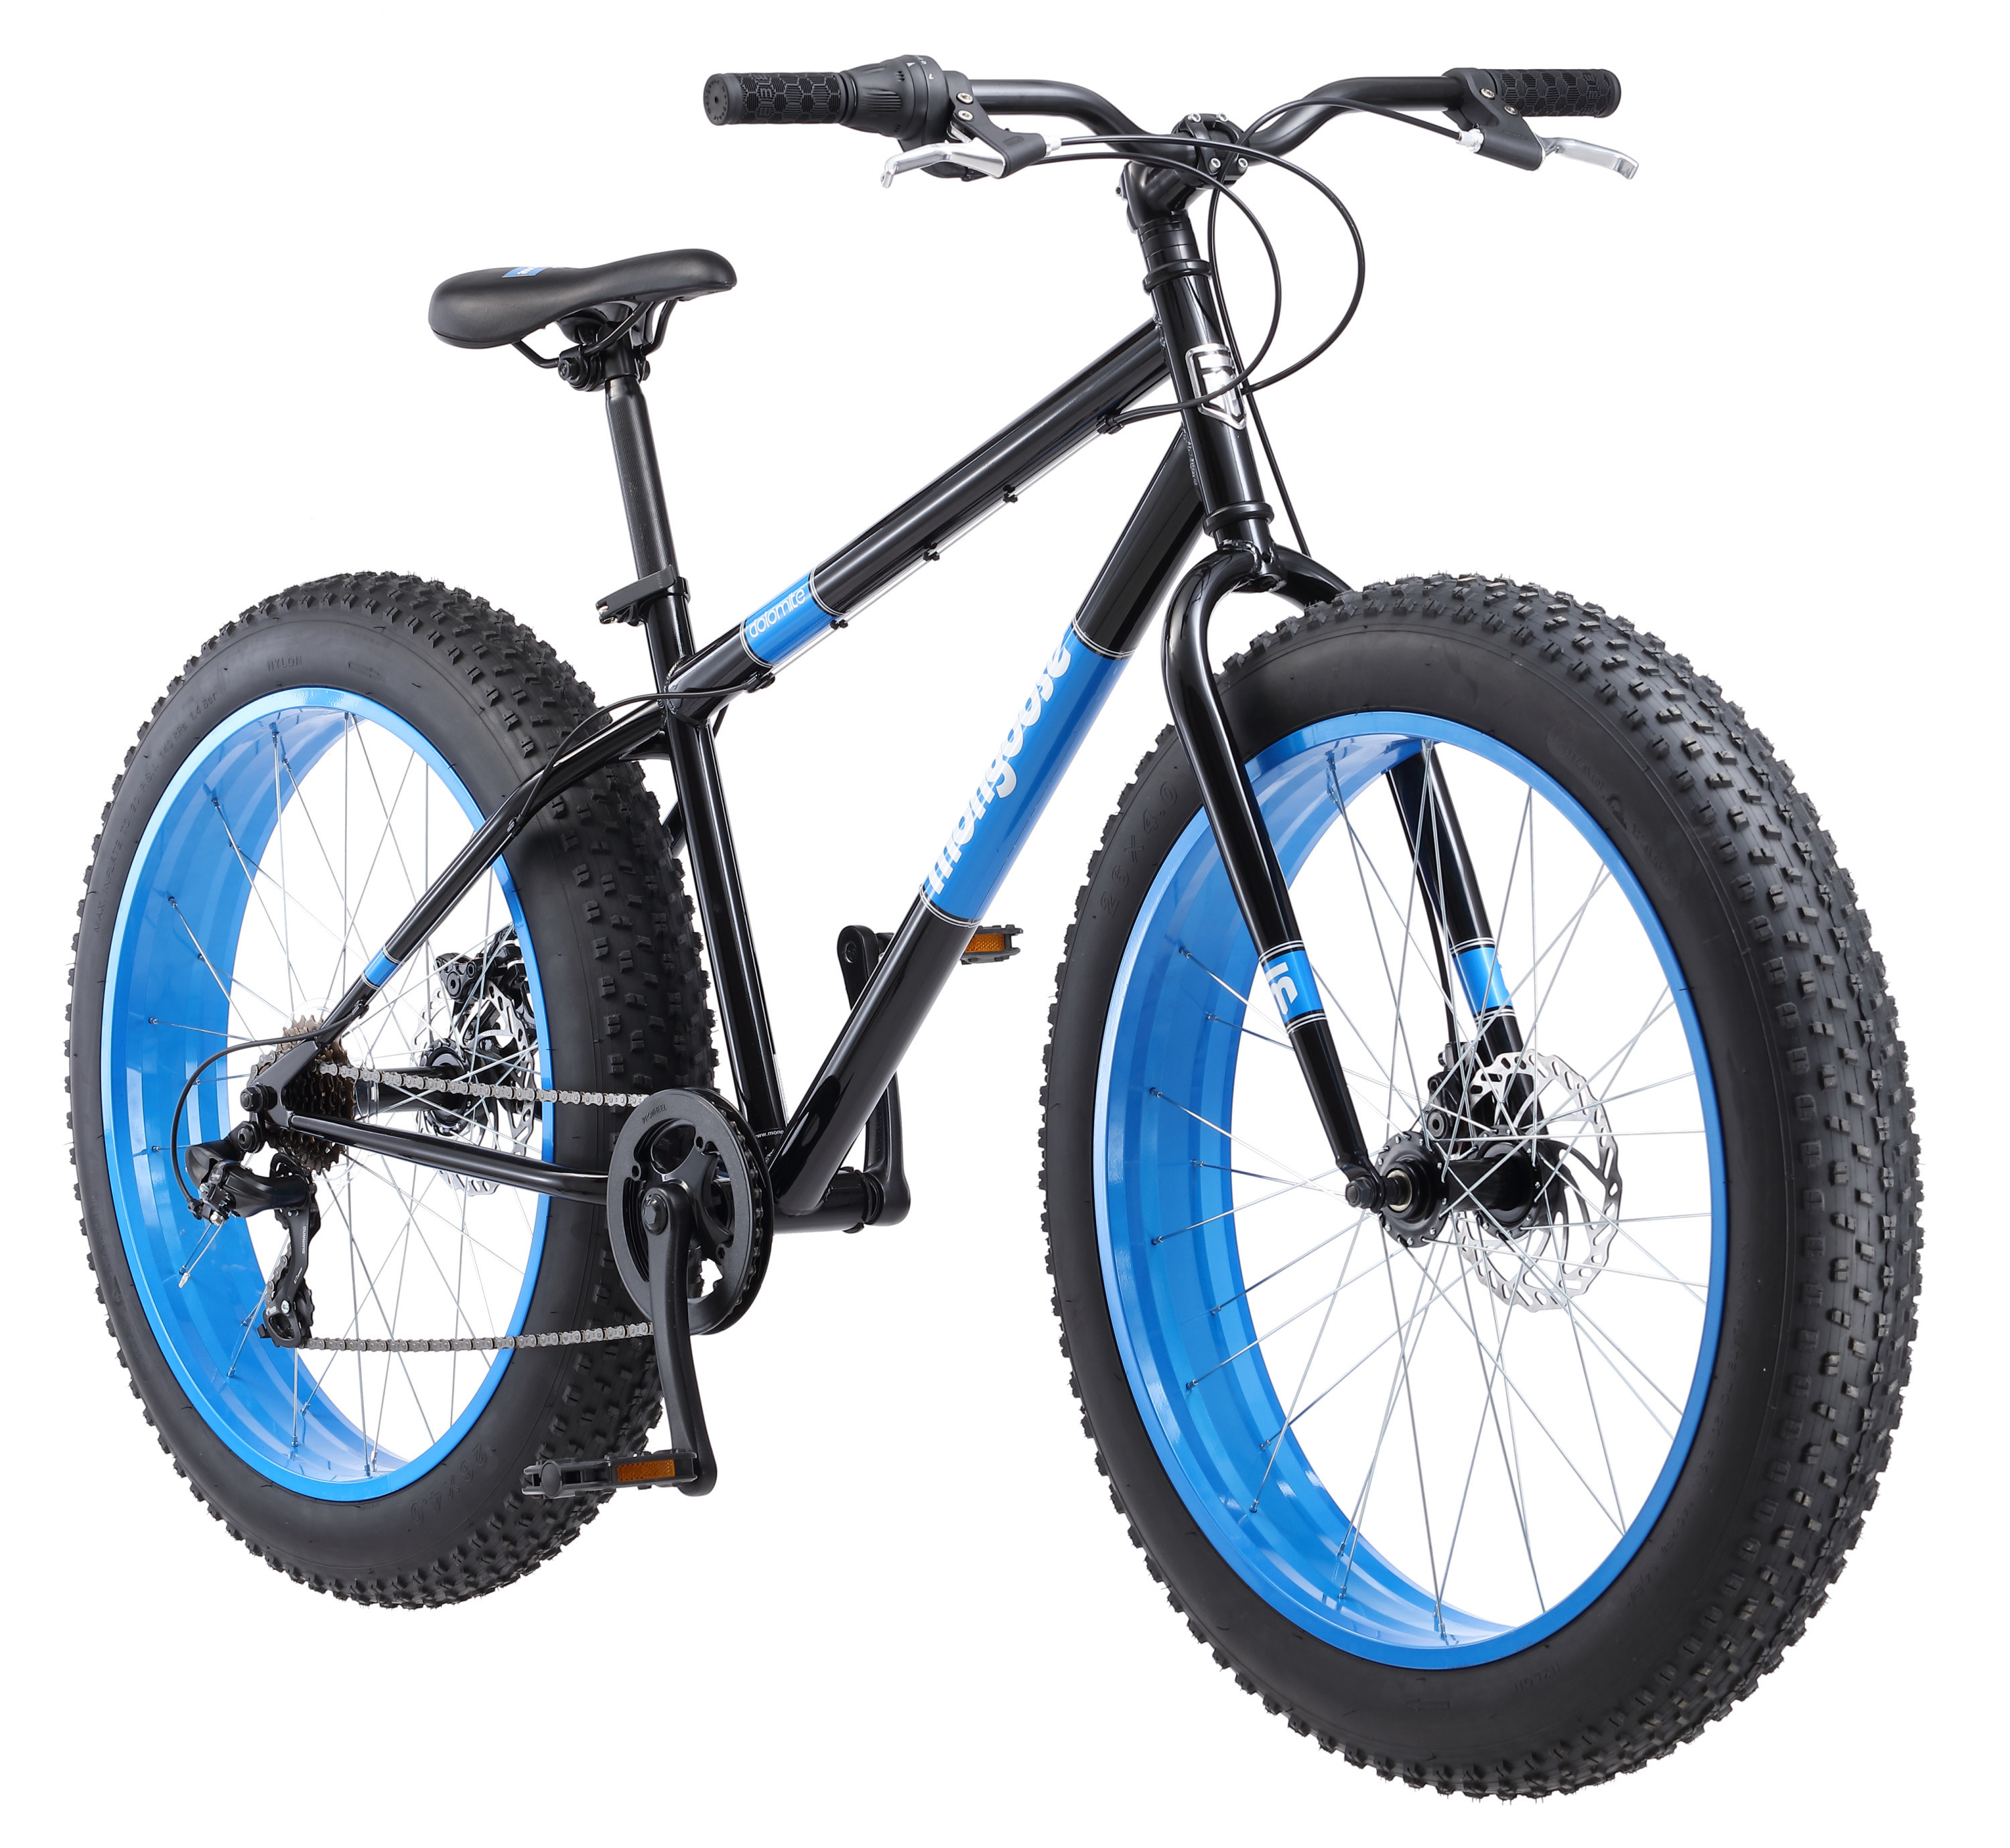 An image of a blue flat tire bike with seven speeds and 26-inch wheels